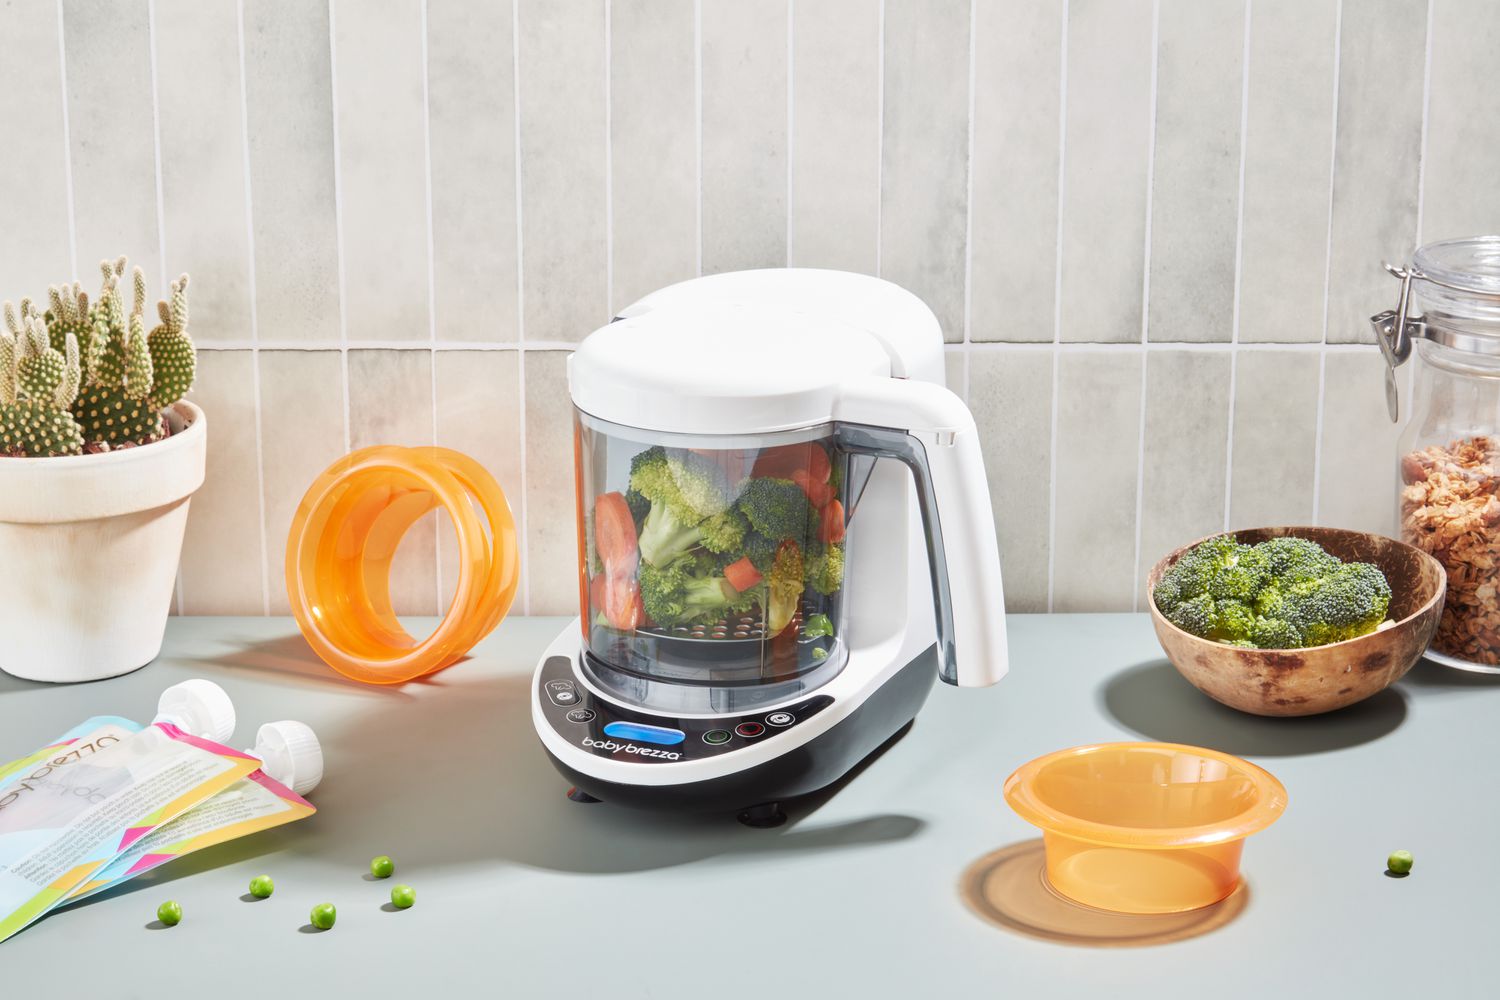 Review: Best Food Processor for Homemade Baby Food